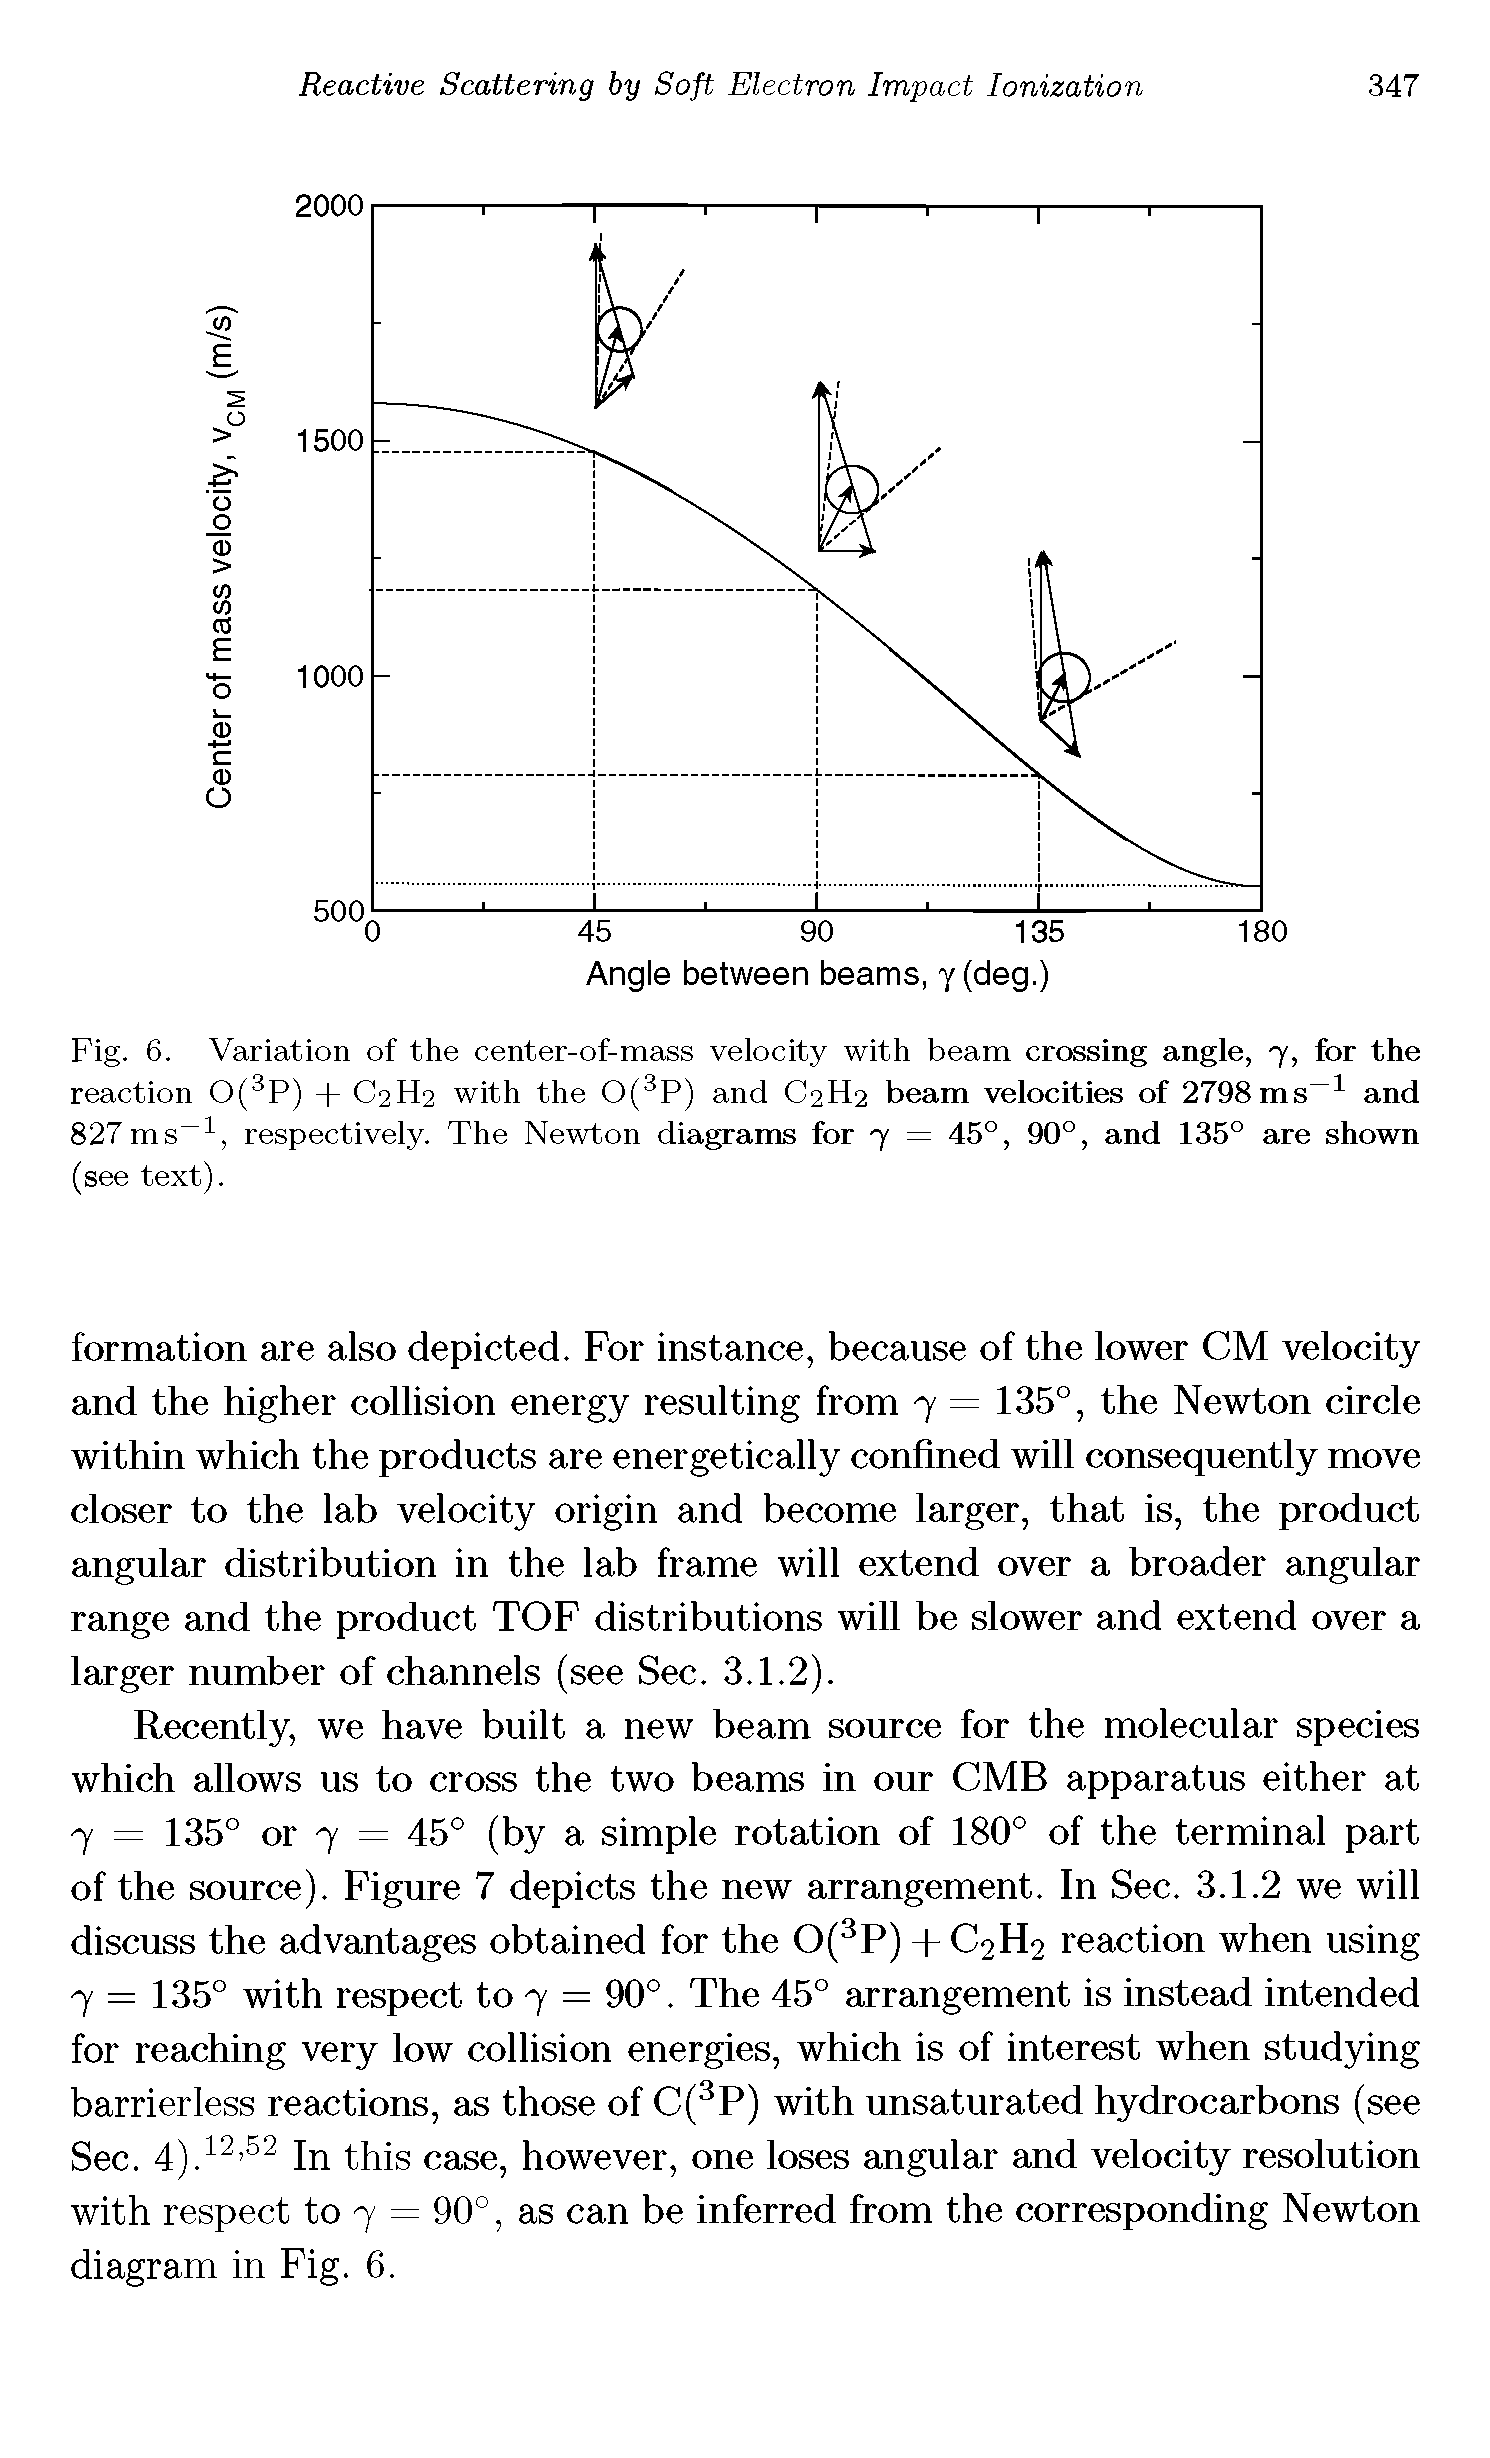 Fig. 6. Variation of the center-of-mass velocity with beam crossing angle, 7, for the reaction 0(3P) + C2H2 with the 0(3P) and C2H2 beam velocities of 2798ms-1 and 827ms 1, respectively. The Newton diagrams for 7 = 45°, 90°, and 135° are shown (see text).